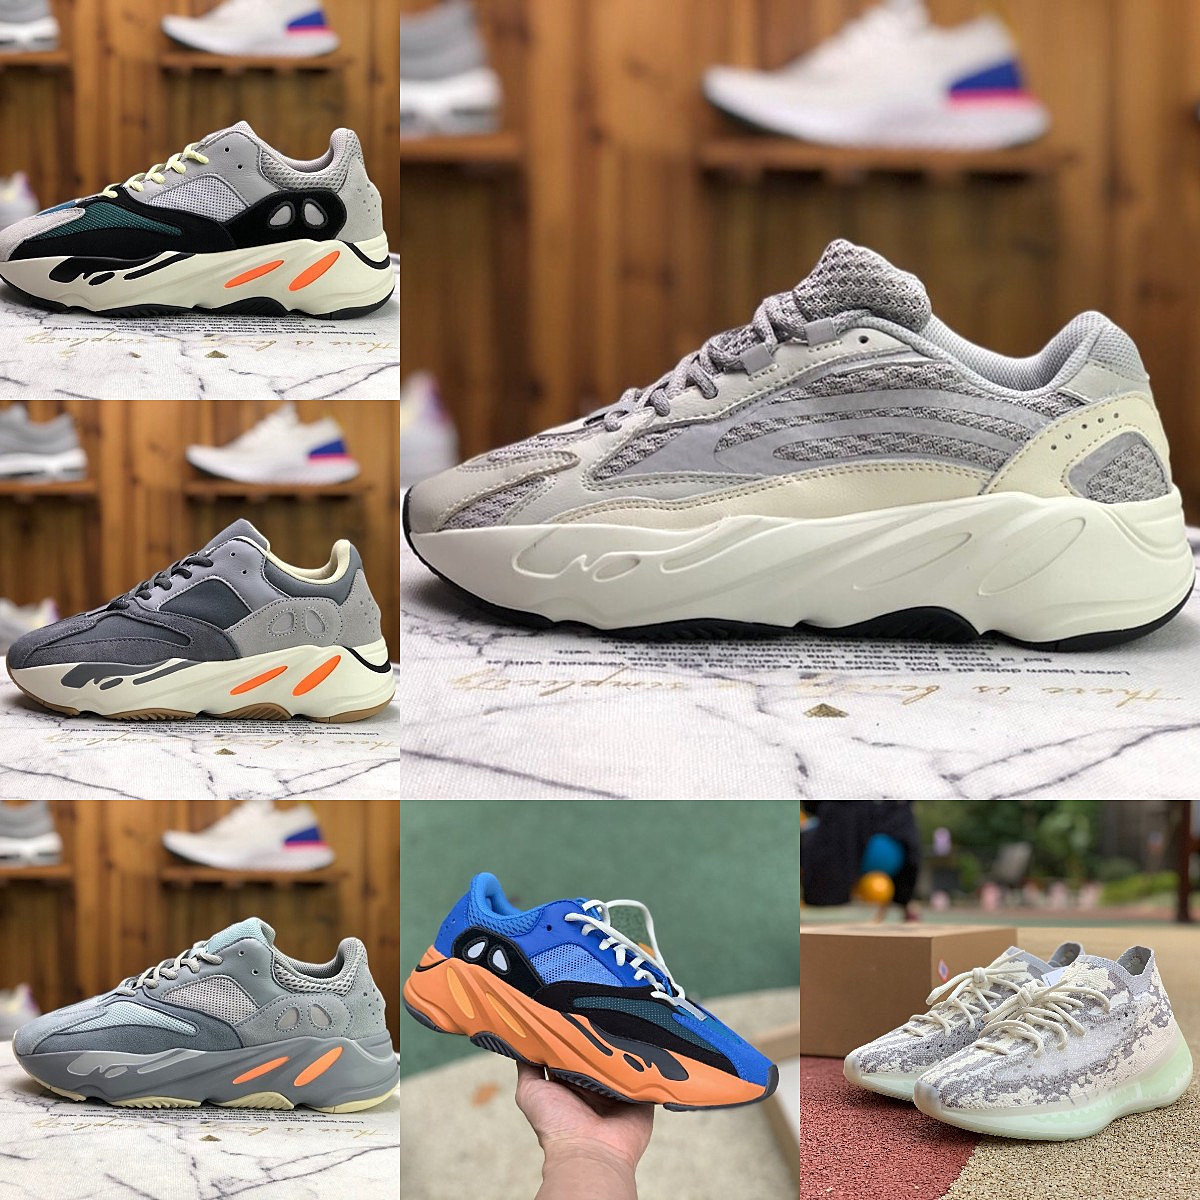 

Designers Enflame Amber 700 V2 Men Women Sports Shoes Runner Sea Bright Blue 700S Geode Inertia Alvah Azael Static Magnet Wave Solid Grey Tephra Trainer Sneakers S58, Please contact us